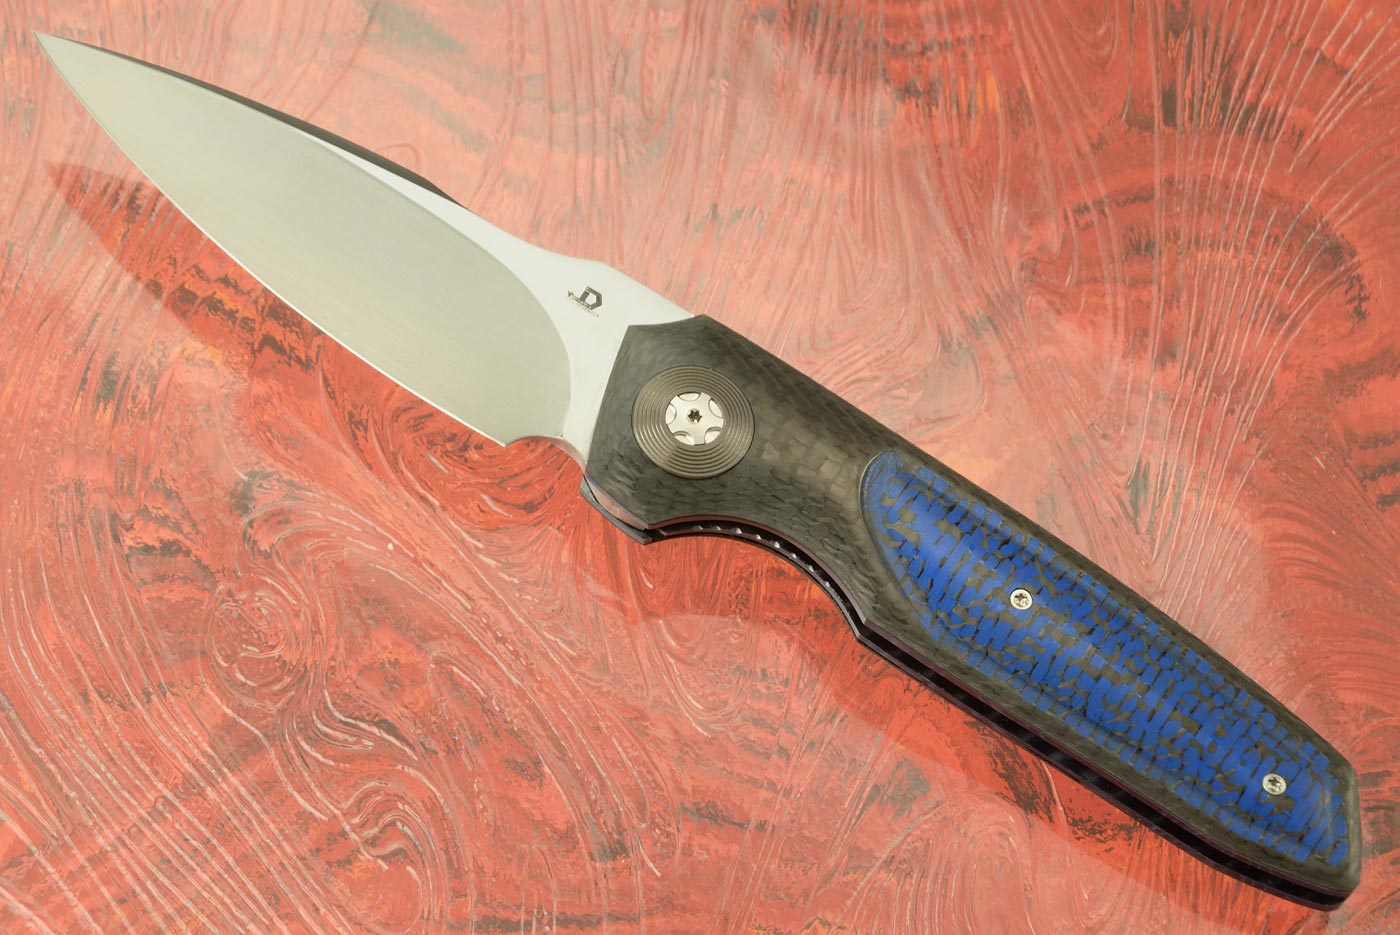 Silver Front Flipper with Black and Blue Carbon Fiber (IKBS)